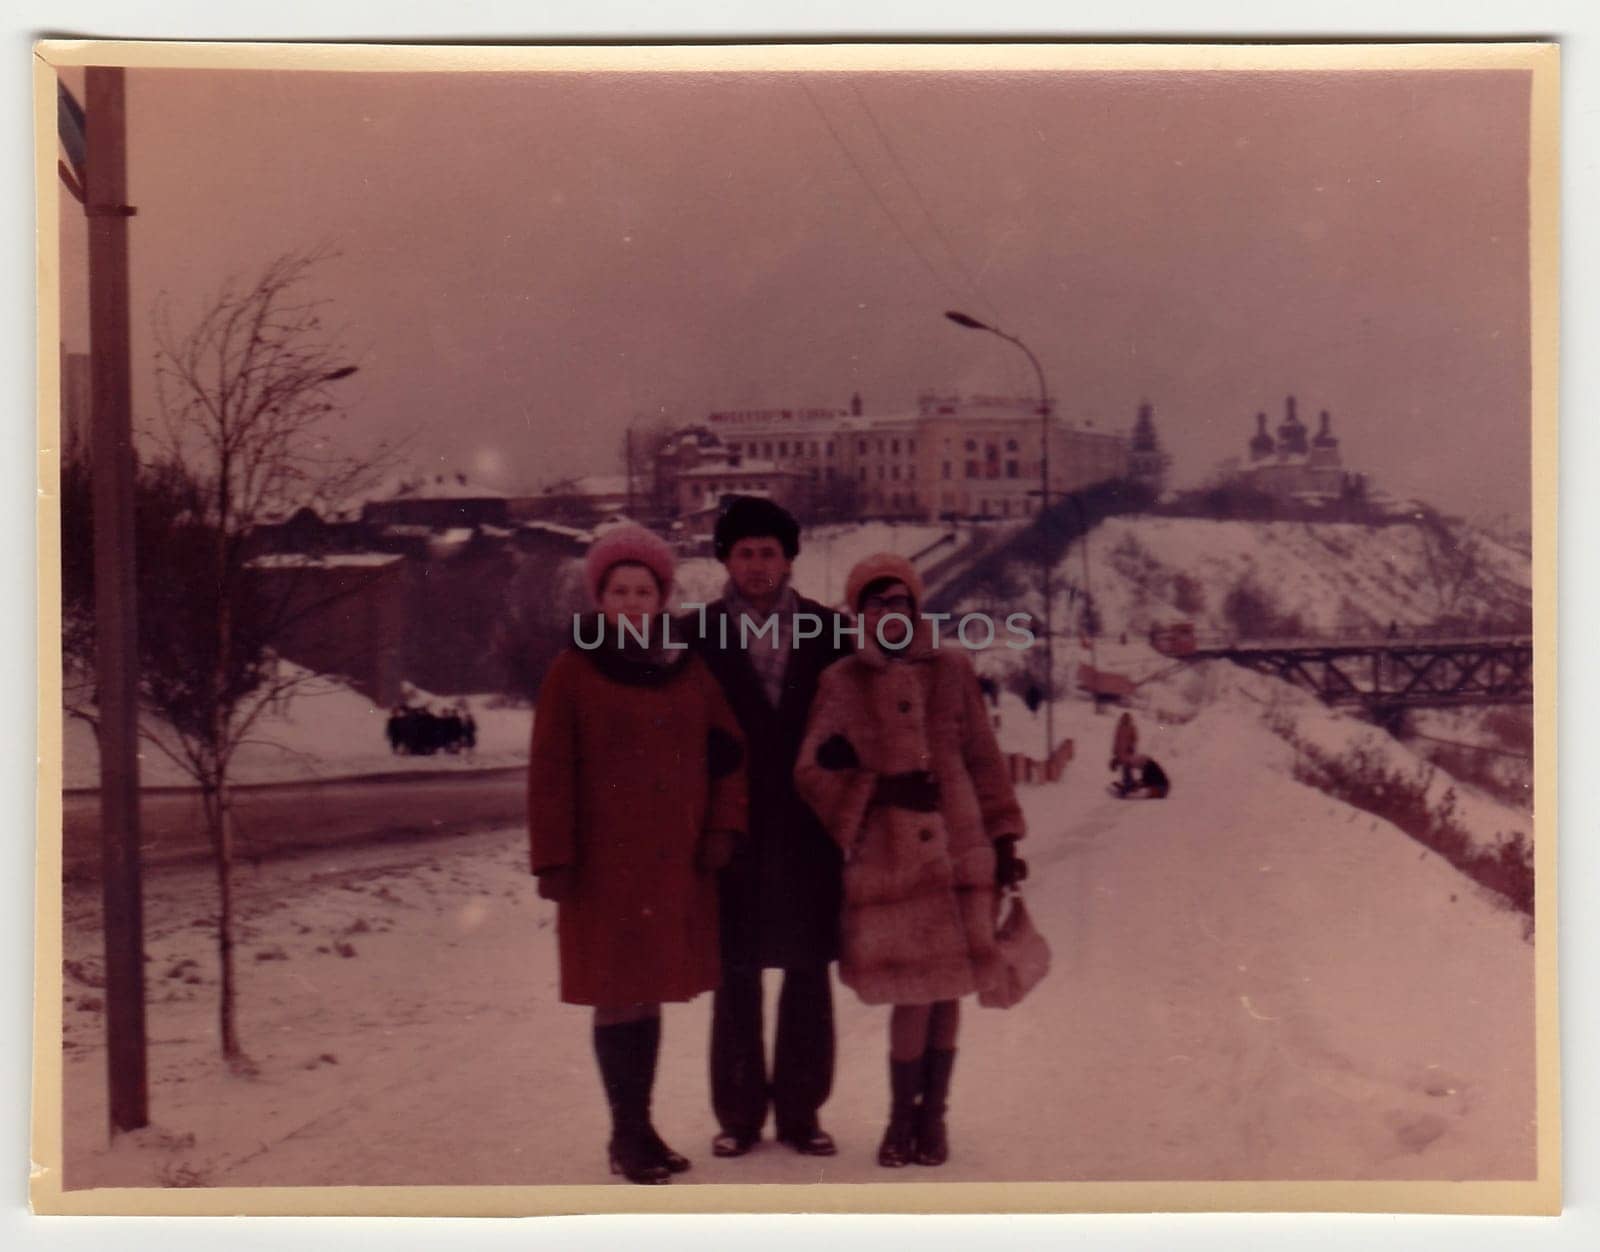 Vintage photo shows people pose on street in winter. by roman_nerud